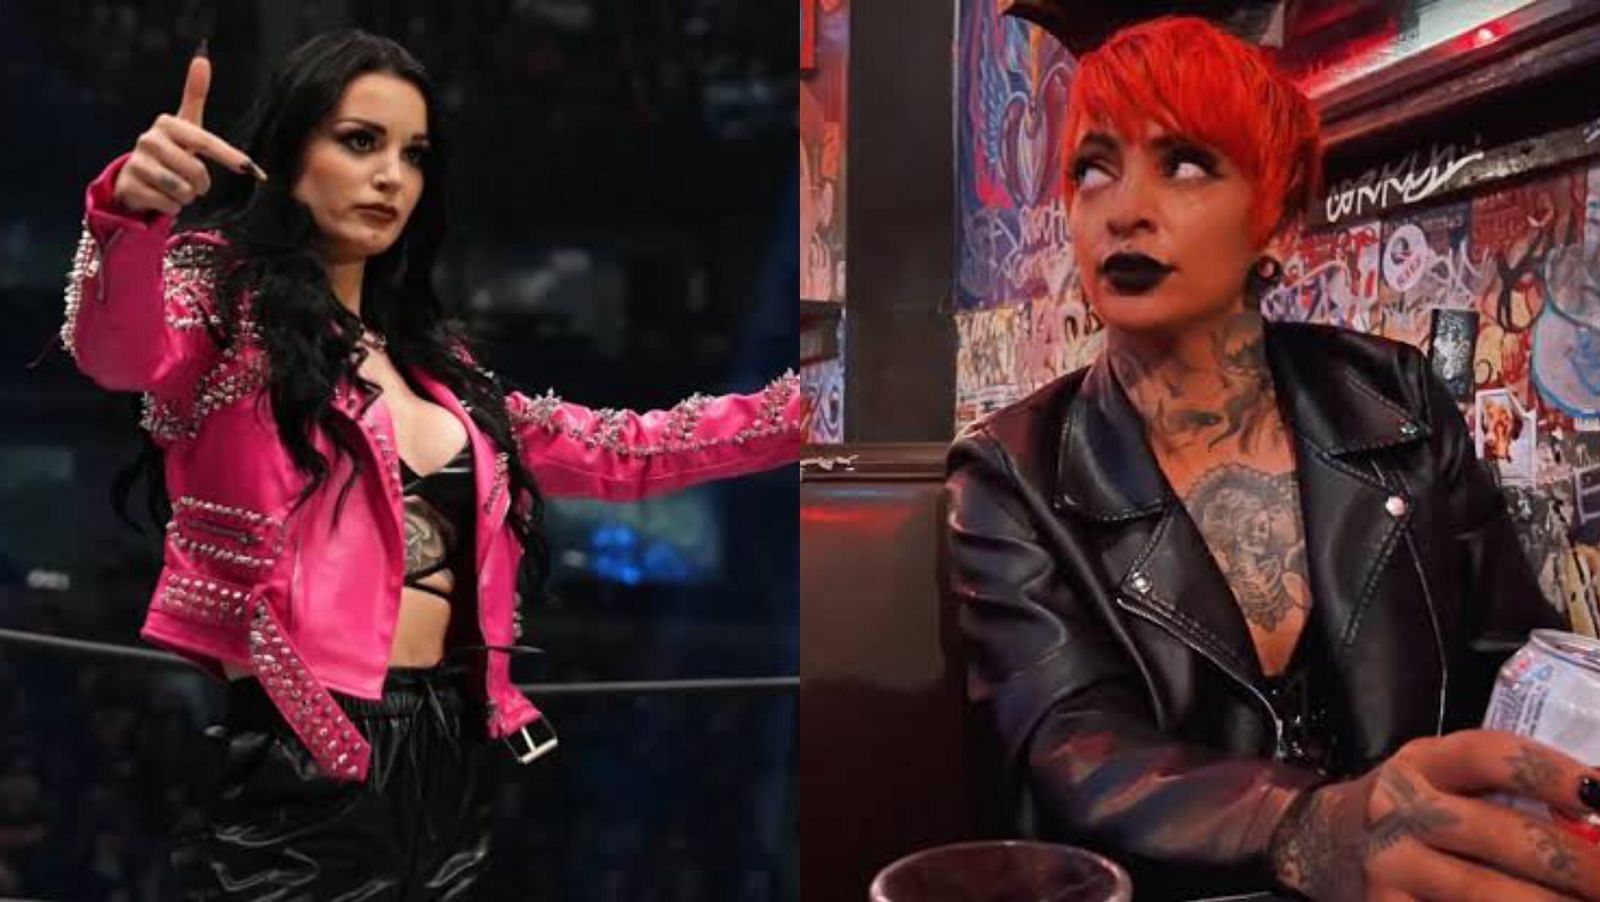 Former AEW champion criticizes Ruby Soho and Saraya for being a bad influence 